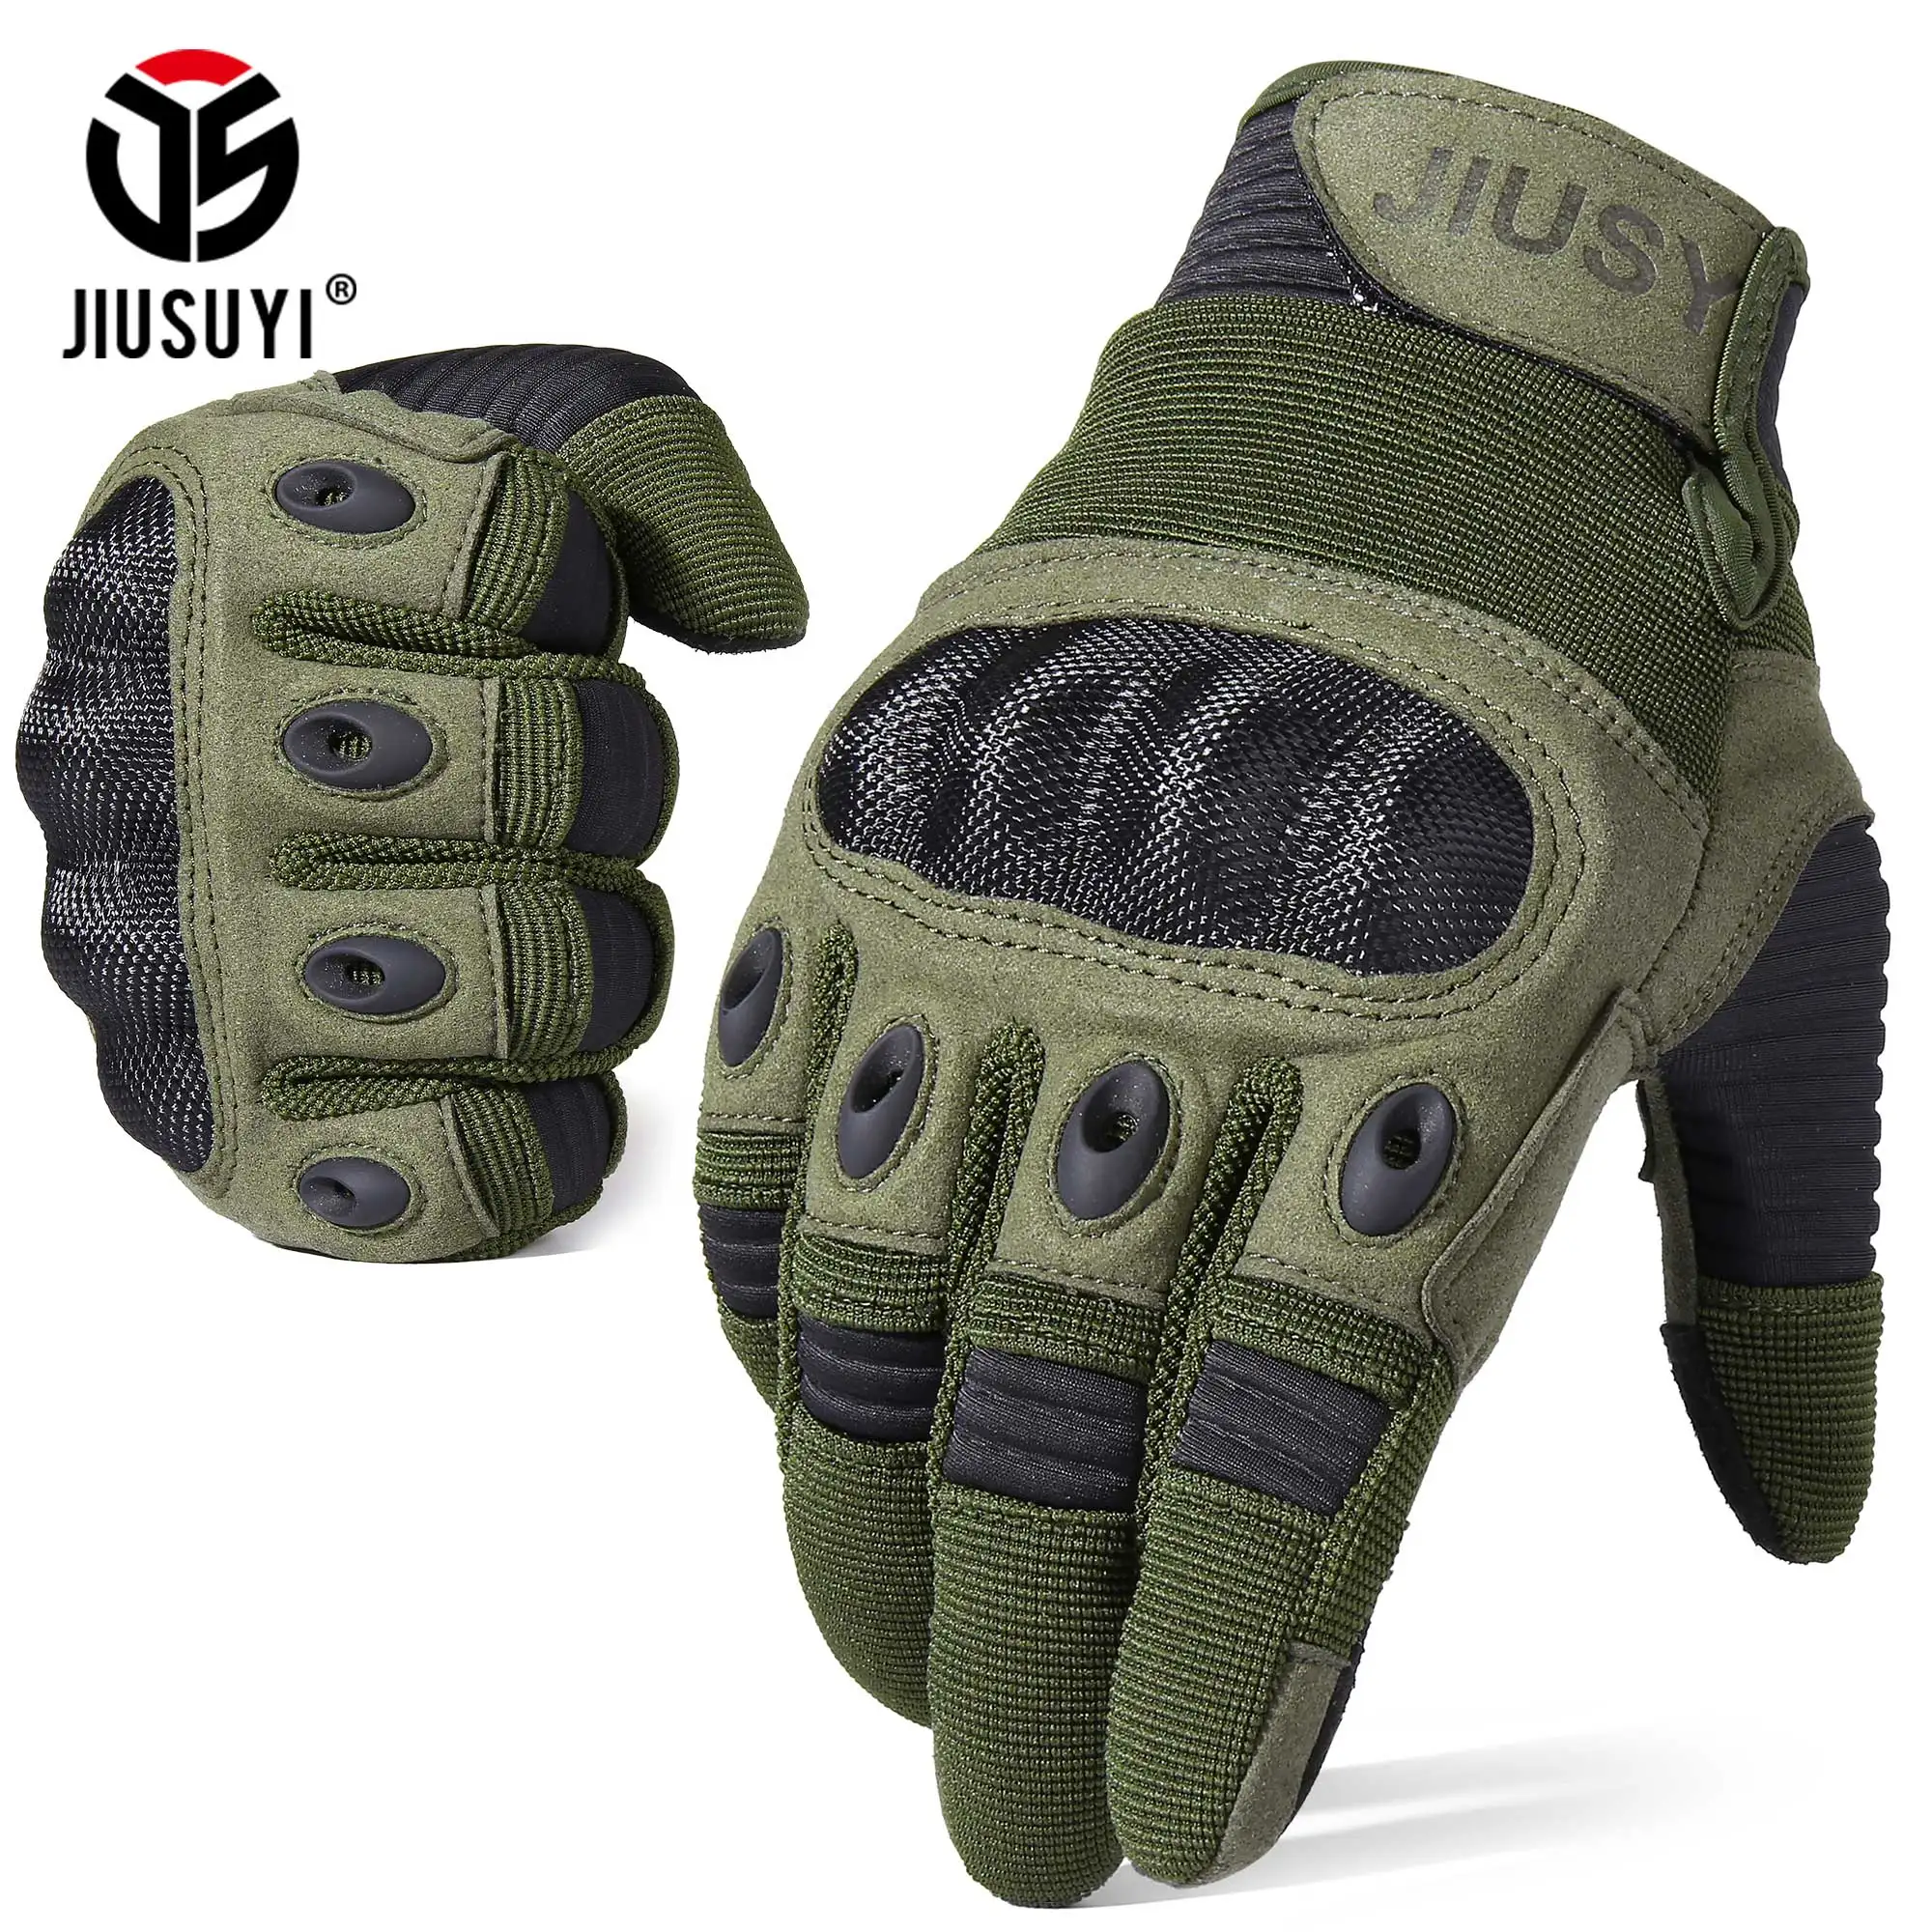 Antarctica Tactical Gloves Army Military Gloves Combat Gloves for Motorcycle Cycling Training Army Shooting Outdoor Gloves 